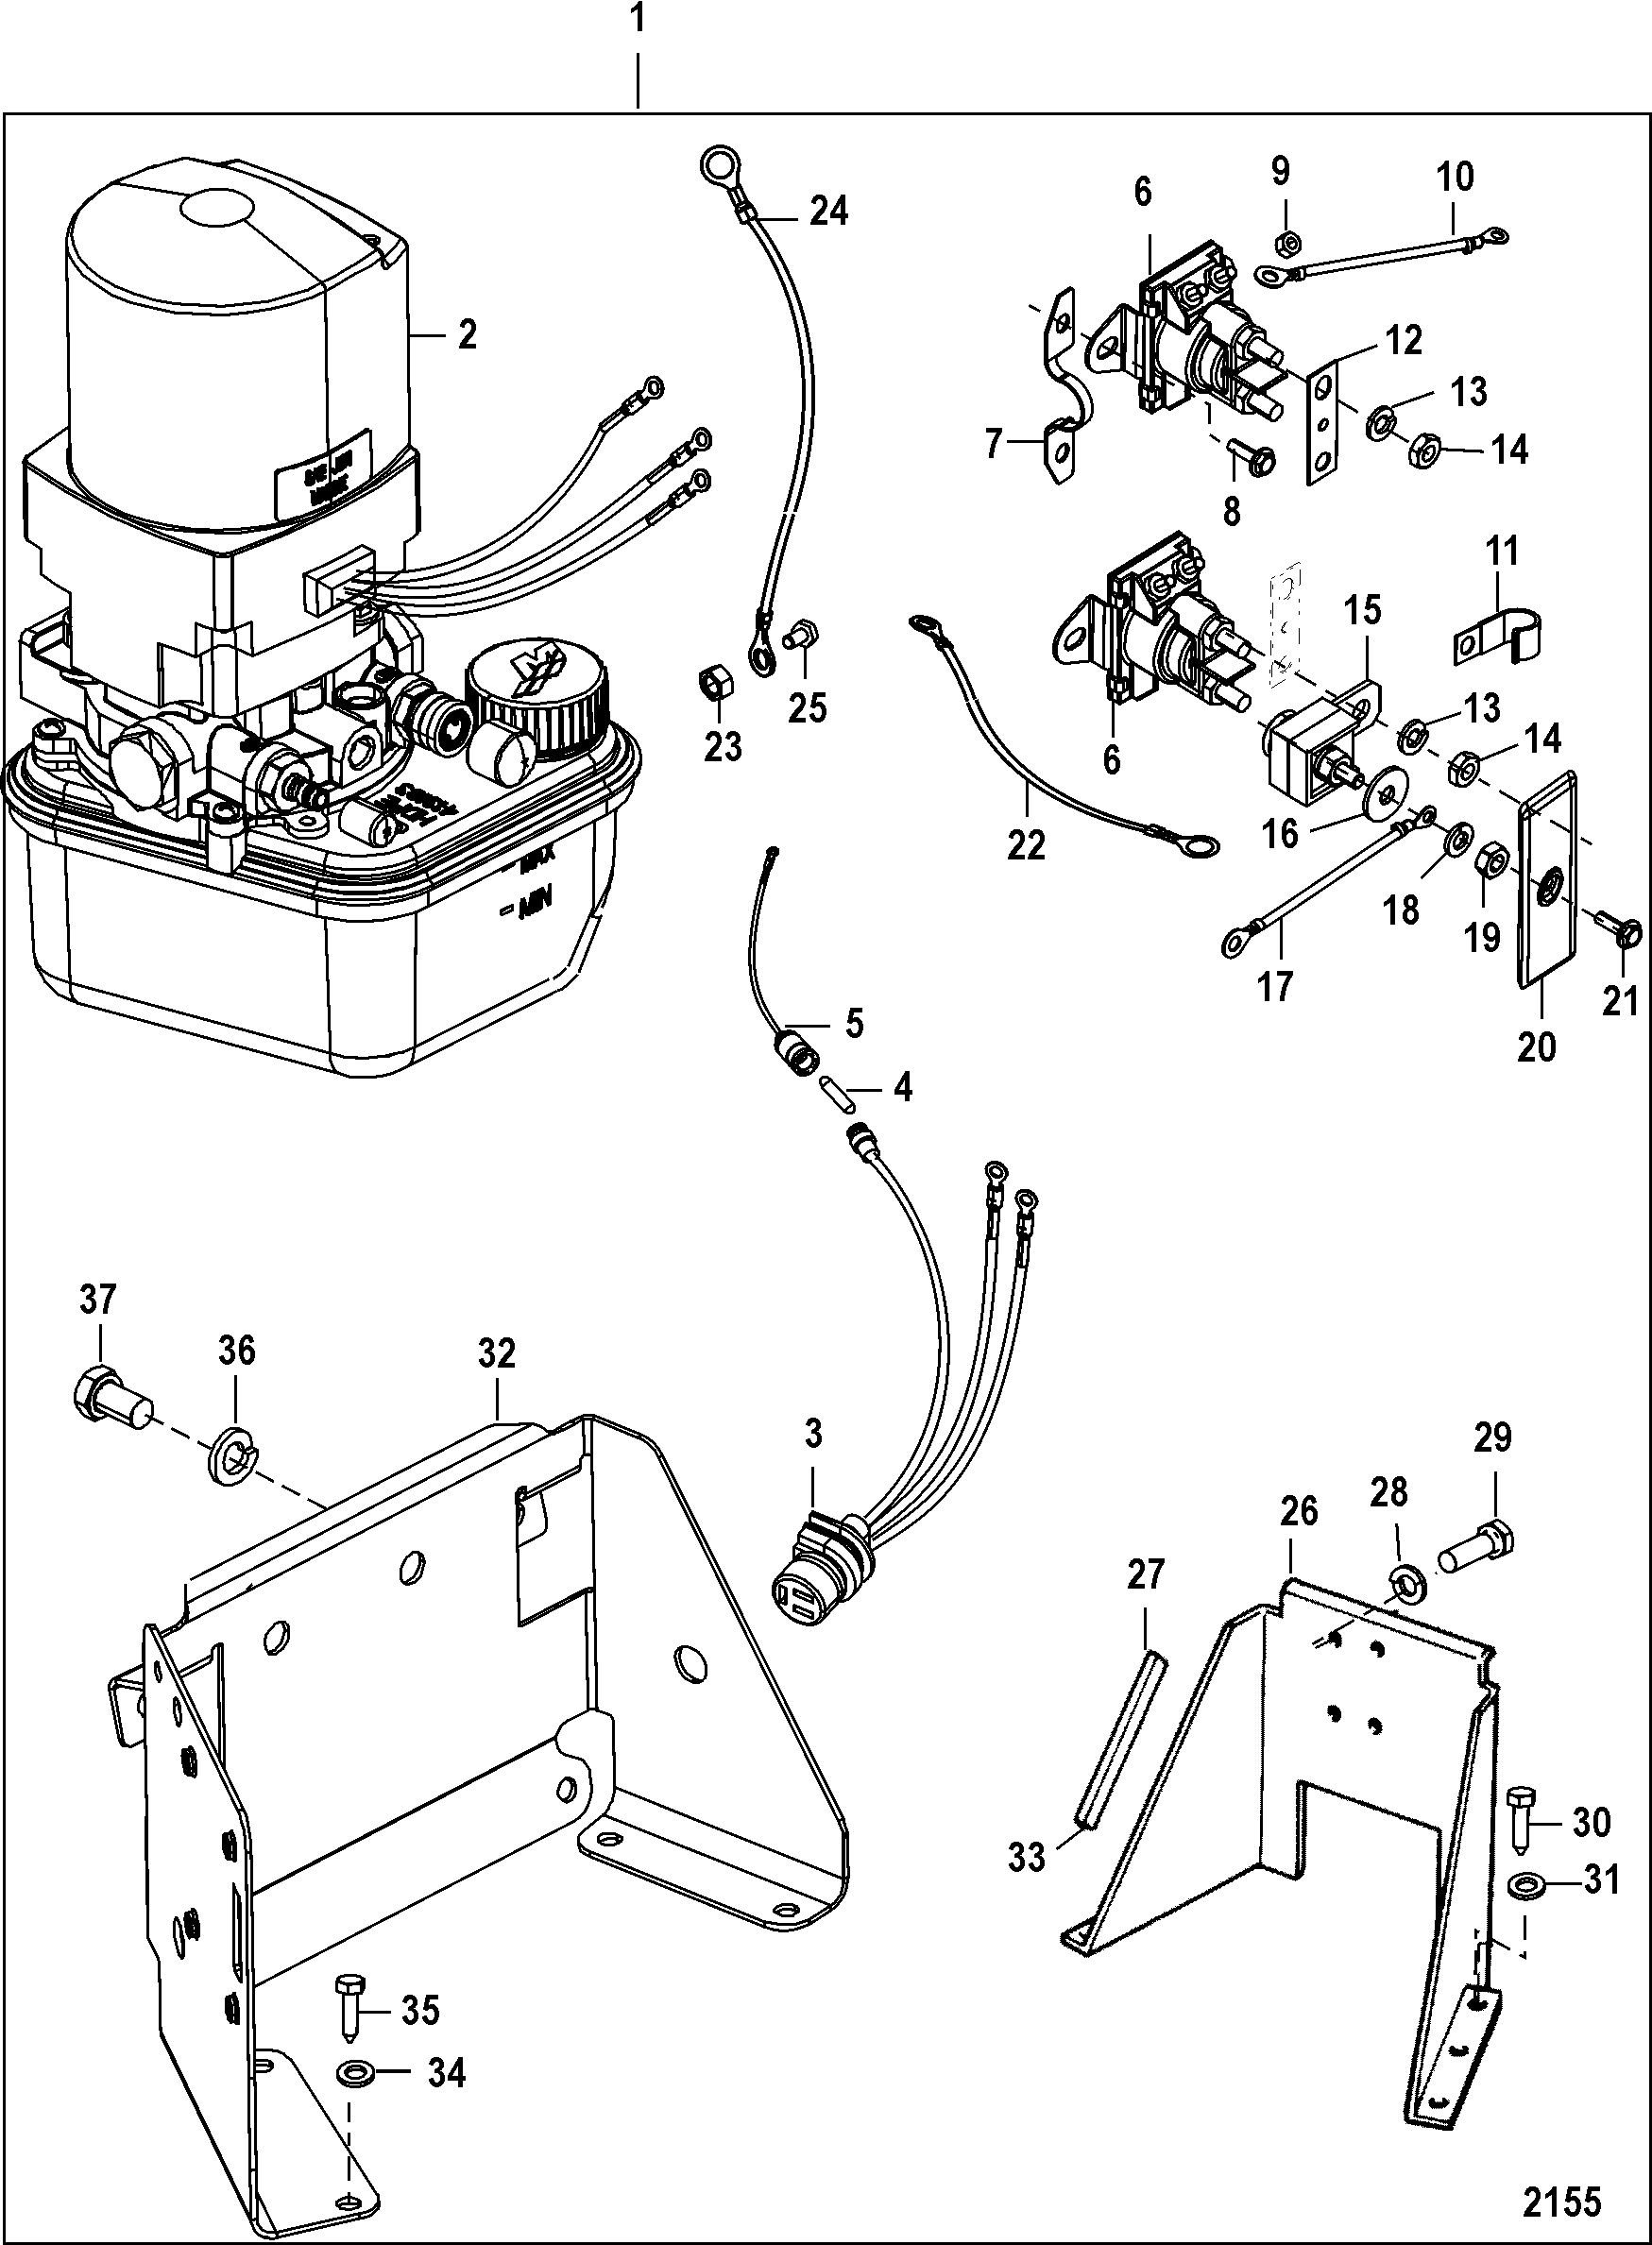 CP Performance - Trim Pump Assembly (Complete)  Wiring Diagram For Mercury Hydraulic Trim Pump    CP Performance